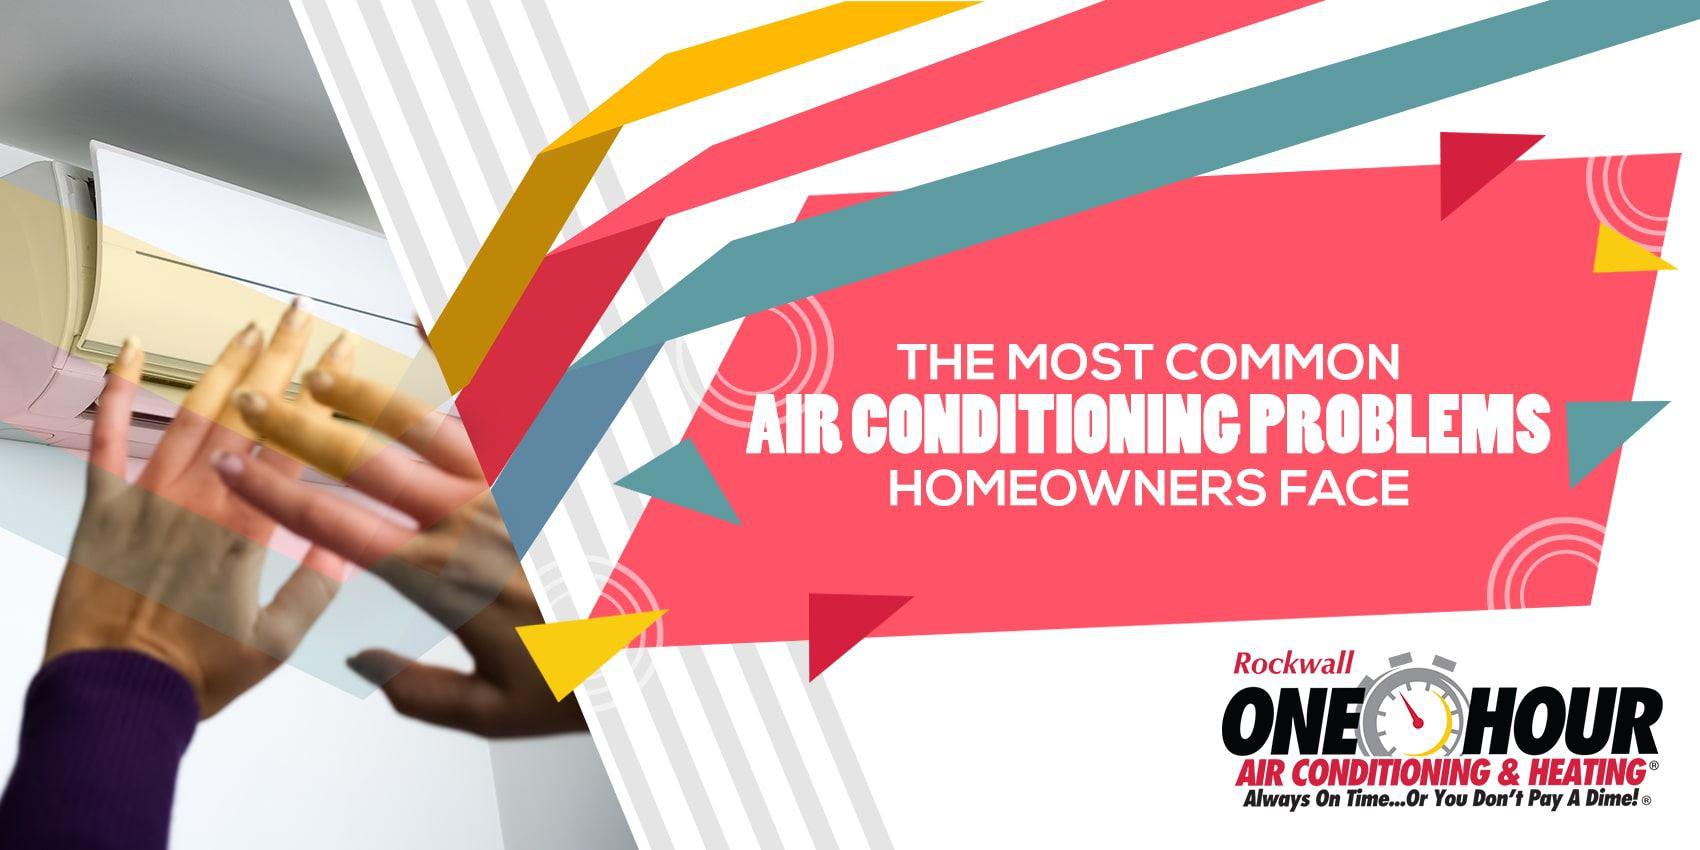 The Most Common Air Conditioning Problems Homeowners Face